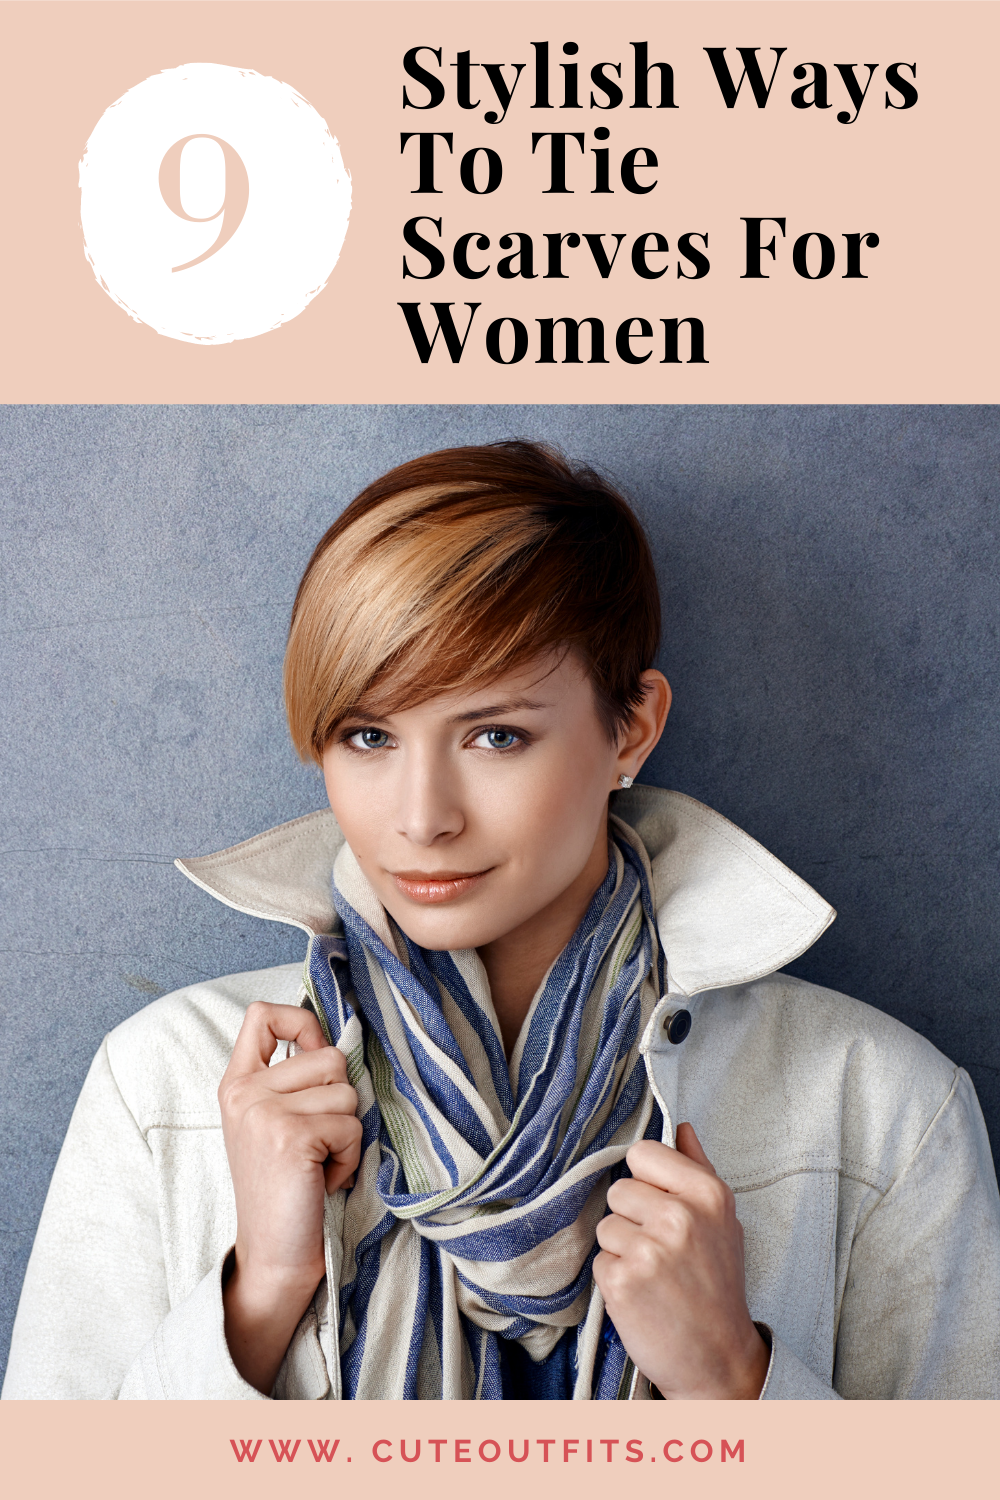 placard | 9 Stylish Ways To Tie Scarves For Women